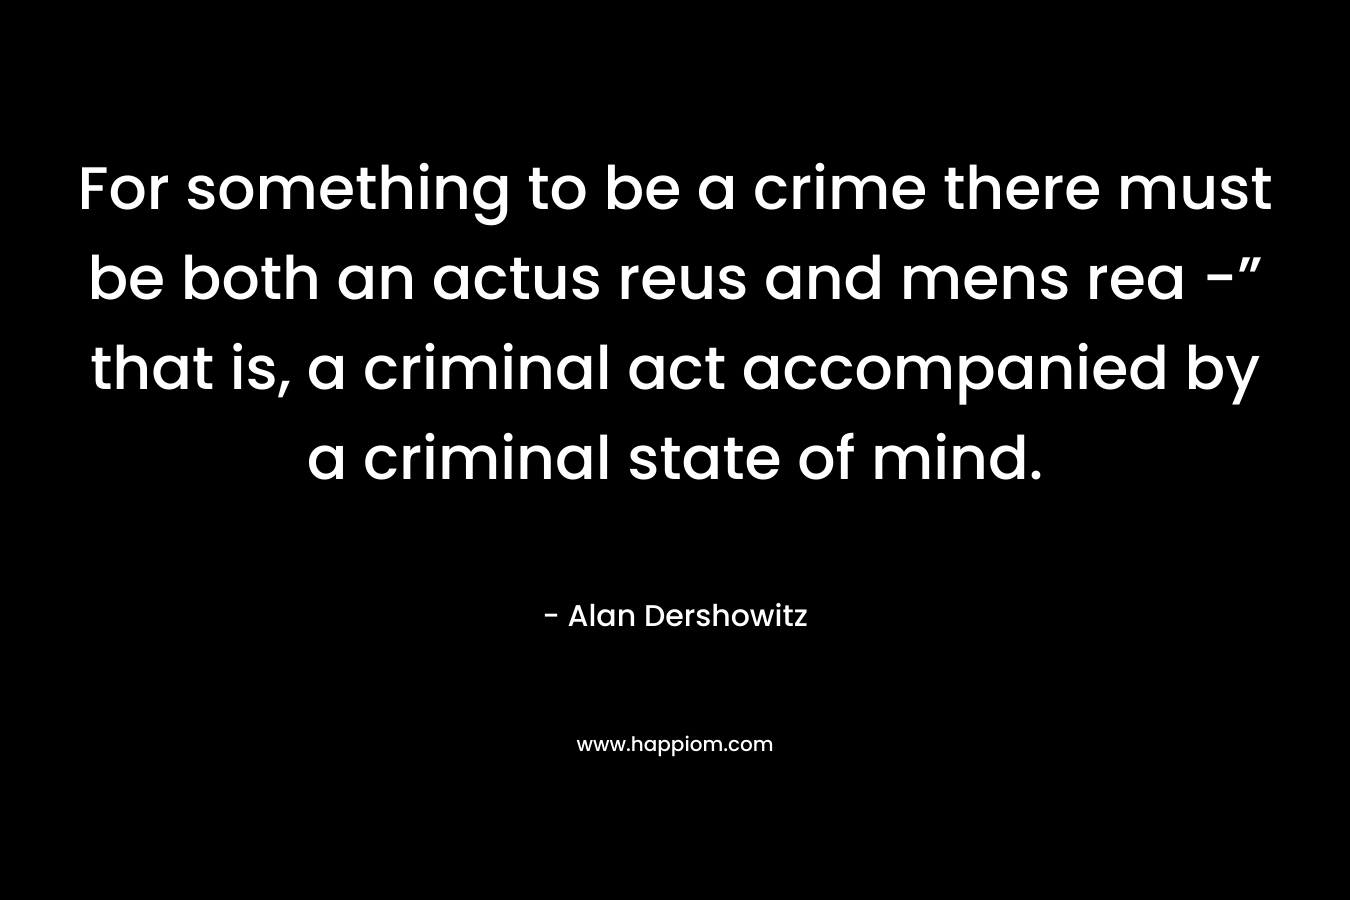 For something to be a crime there must be both an actus reus and mens rea -” that is, a criminal act accompanied by a criminal state of mind.